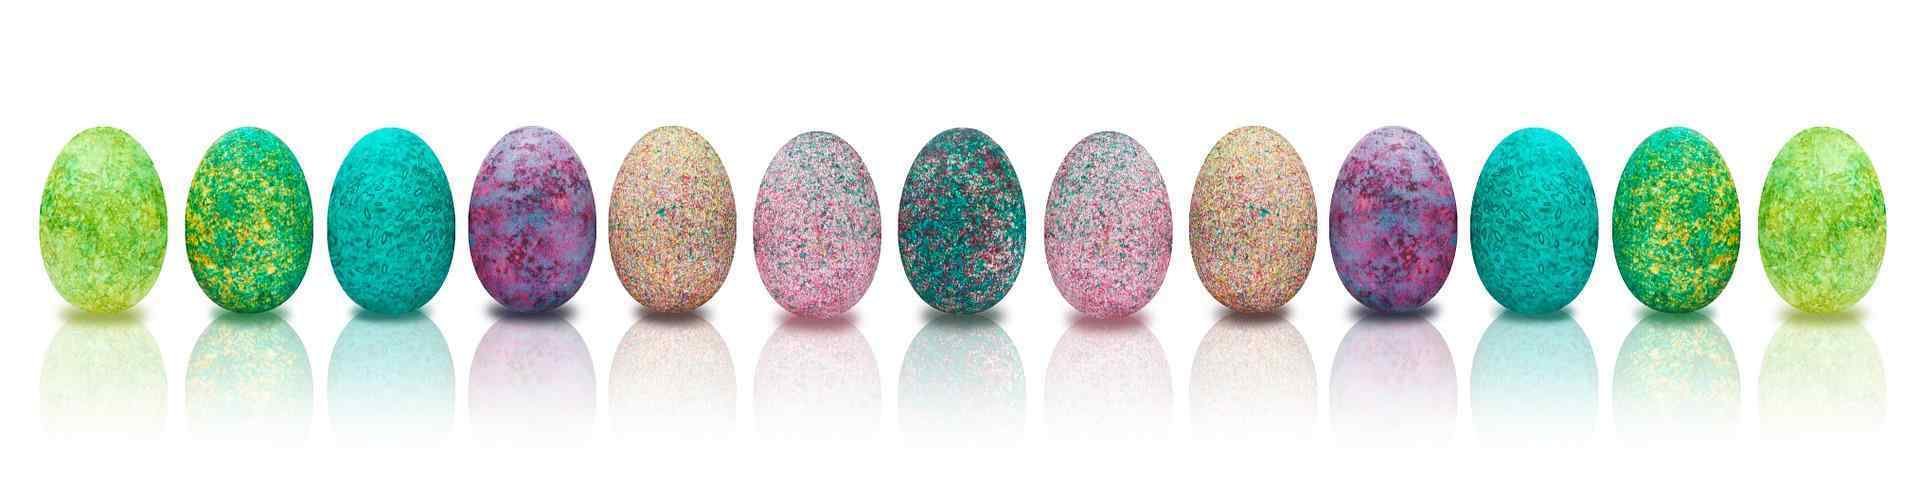 A selection of painted eggs